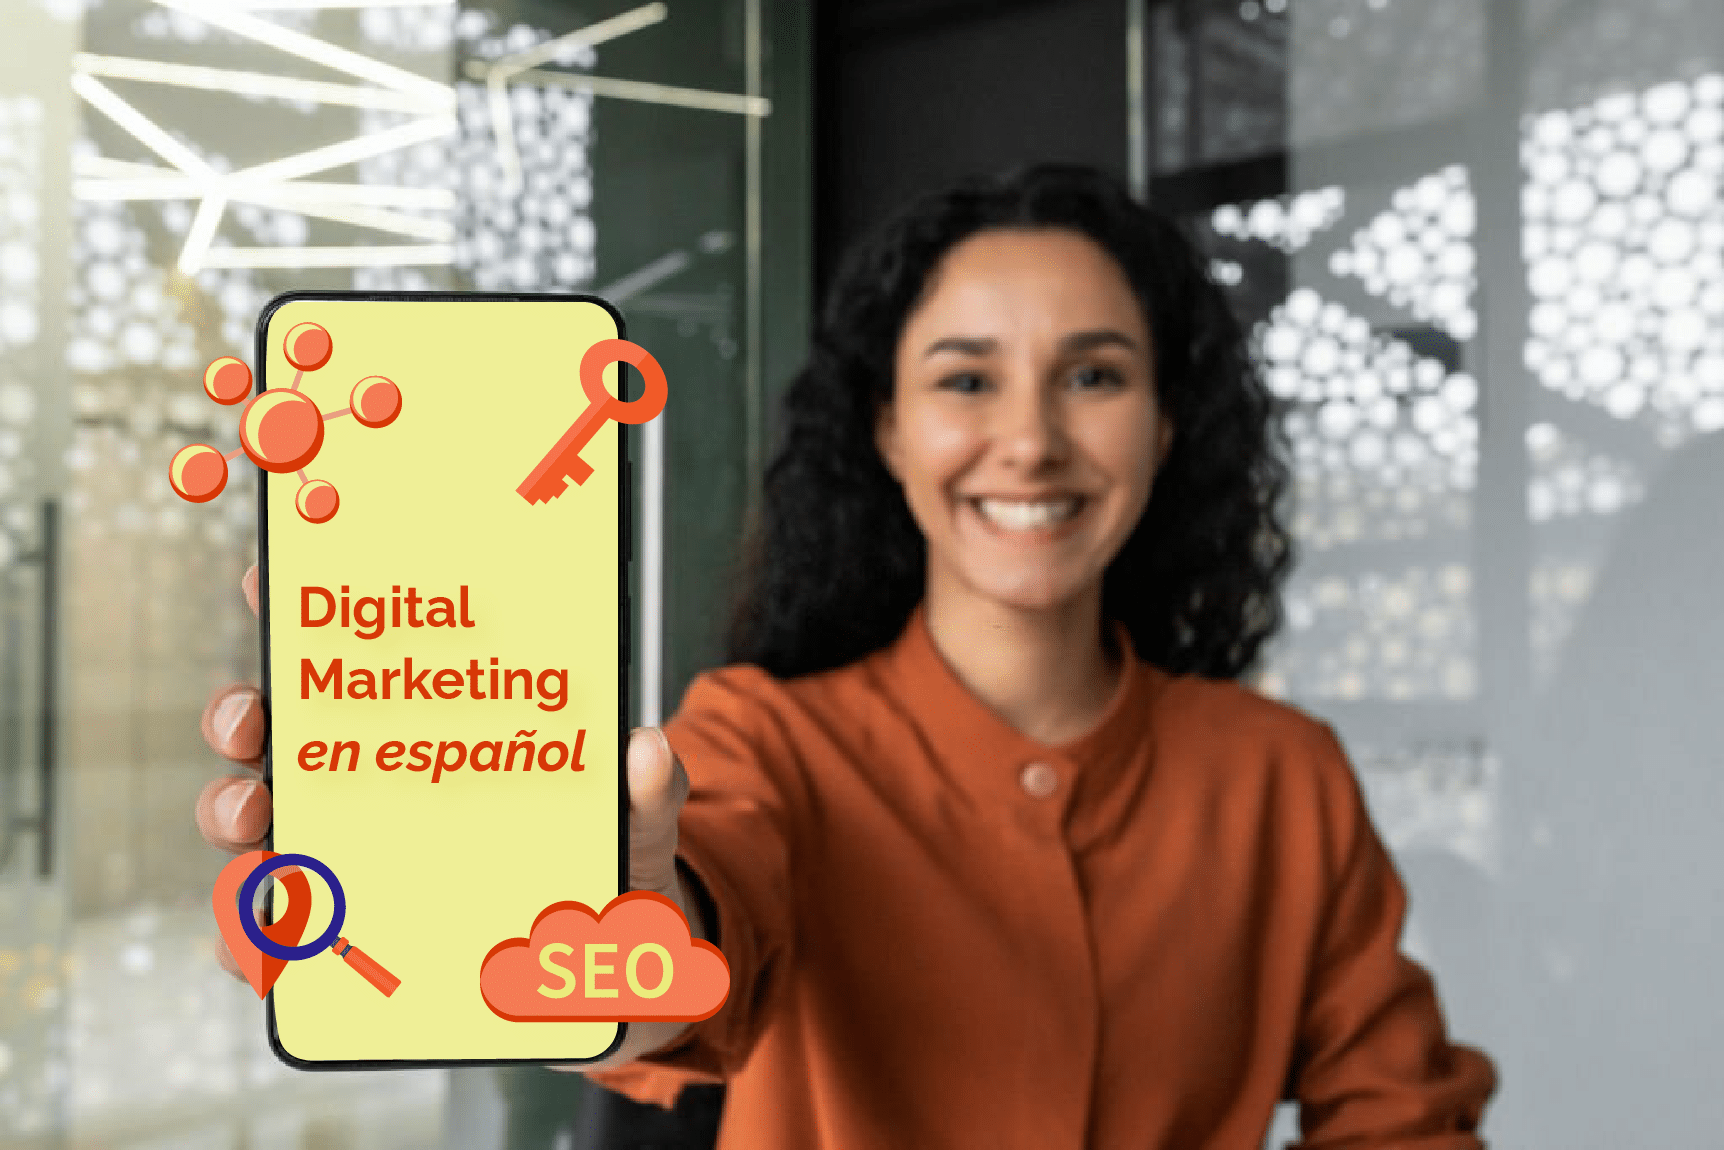 Alpha - Digital Marketing in Spanish - a woman holds a cellphone up